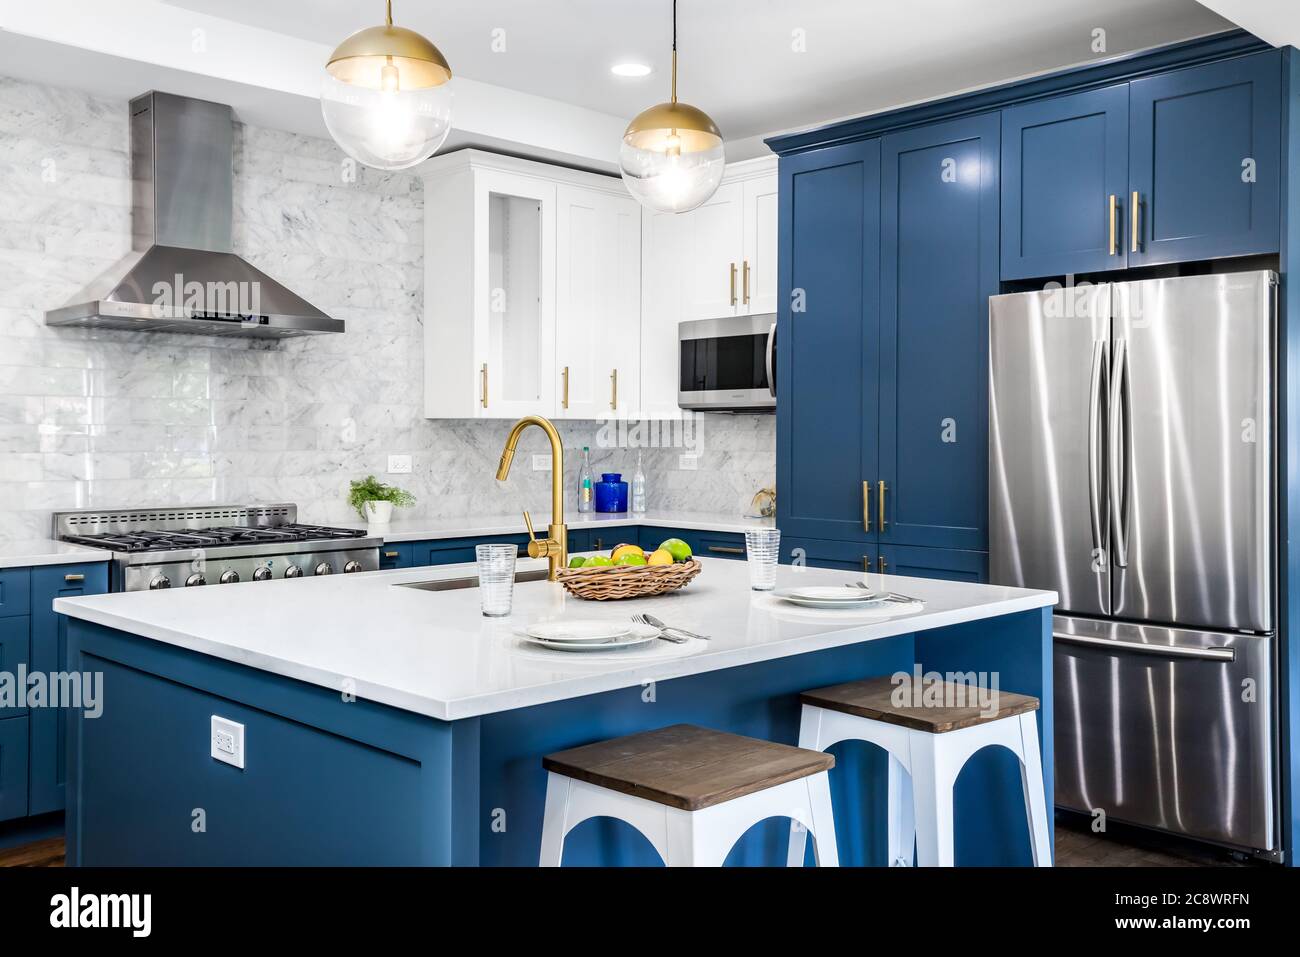 https://c8.alamy.com/comp/2C8WRFN/a-luxurious-white-and-blue-kitchen-with-gold-hardware-bosch-and-samsung-stainless-steel-appliances-and-white-marbled-granite-counter-tops-2C8WRFN.jpg